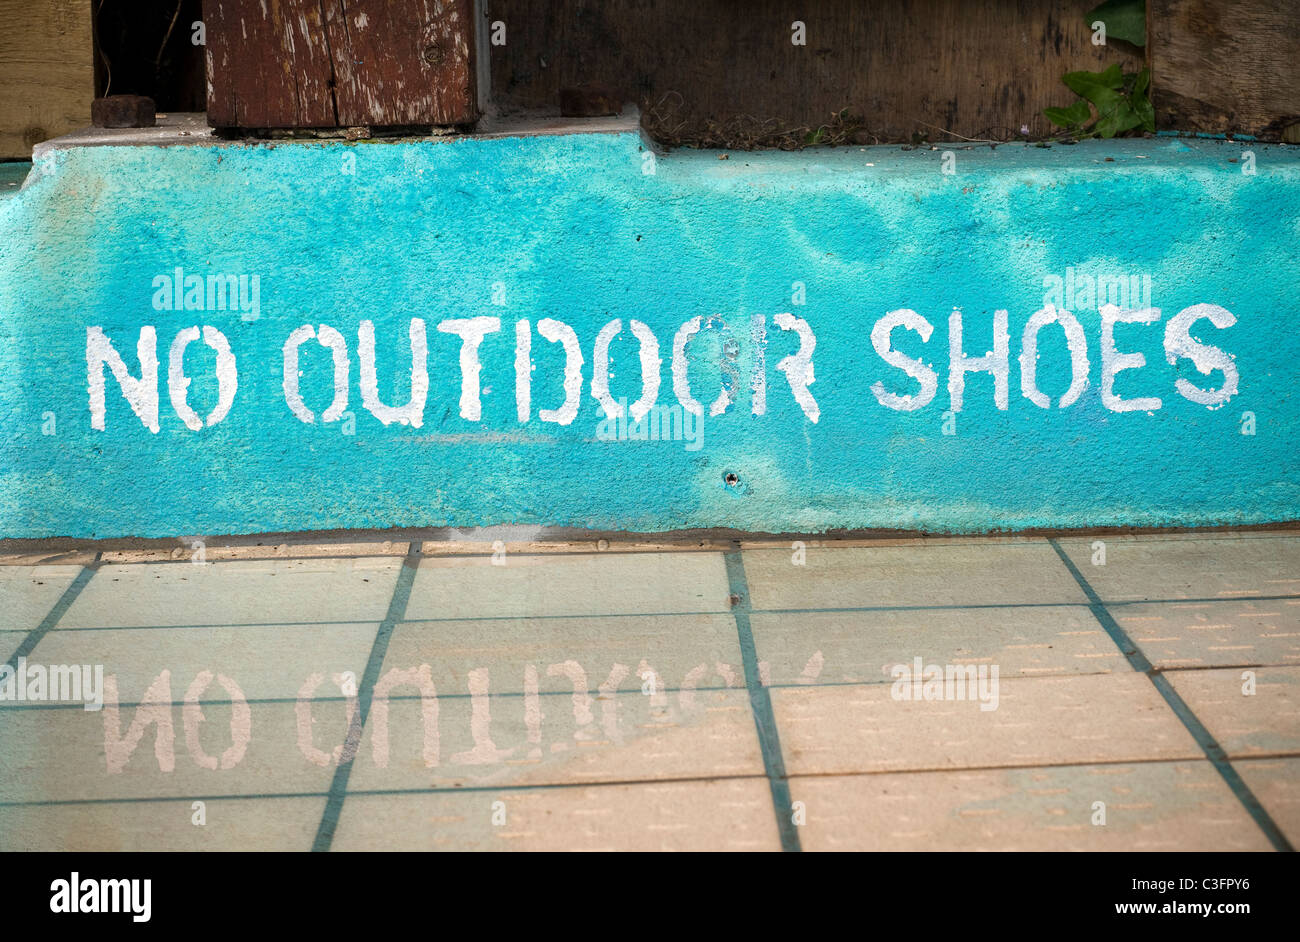 Swimming pool sign,No outdoor shoes,hygiene hypothesis Stock Photo